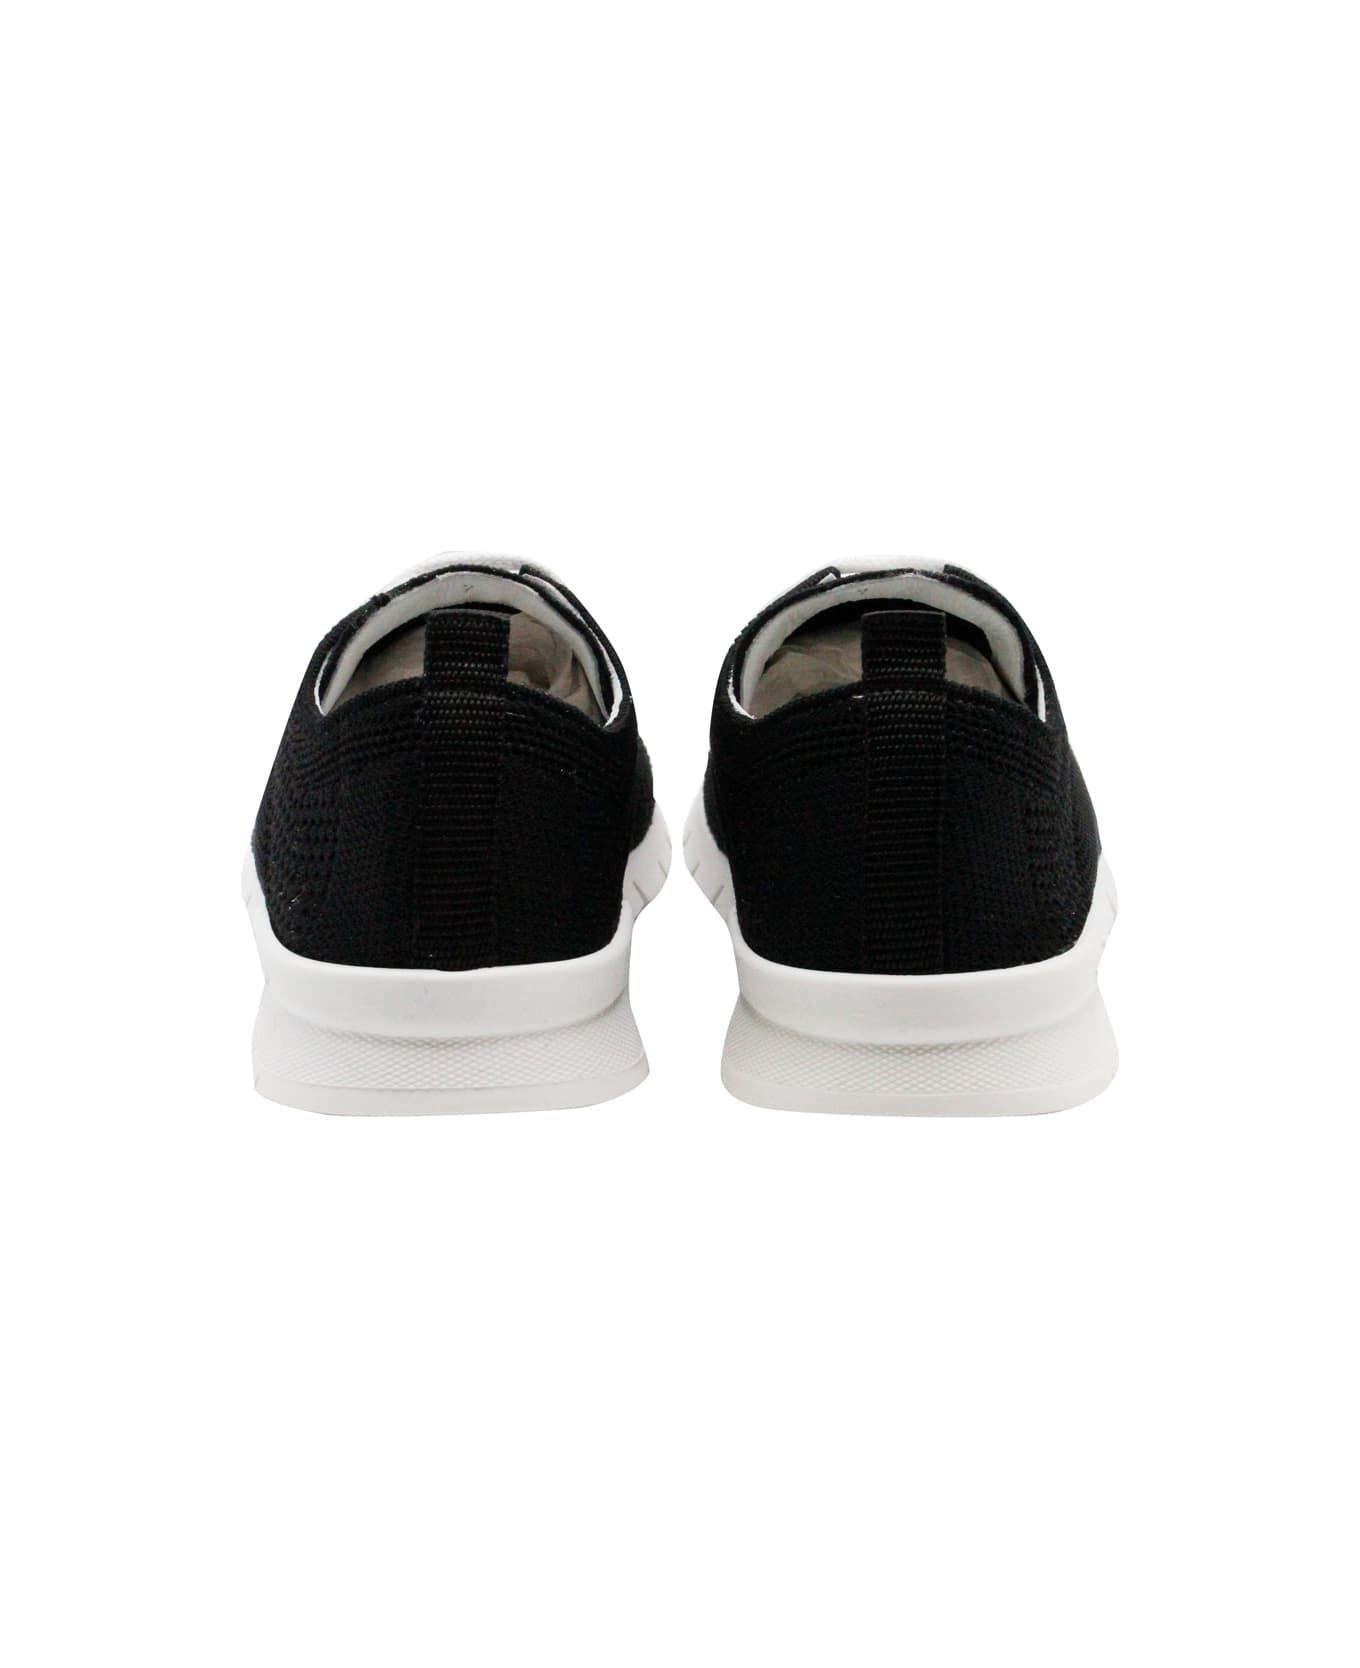 Kiton Sneakers Made Of Knitted Fabric. The Bottom, With A White Sole, Is Flexible And Extralight; The Elastic Tongue Ensures Greater Comfort. Logo - Black